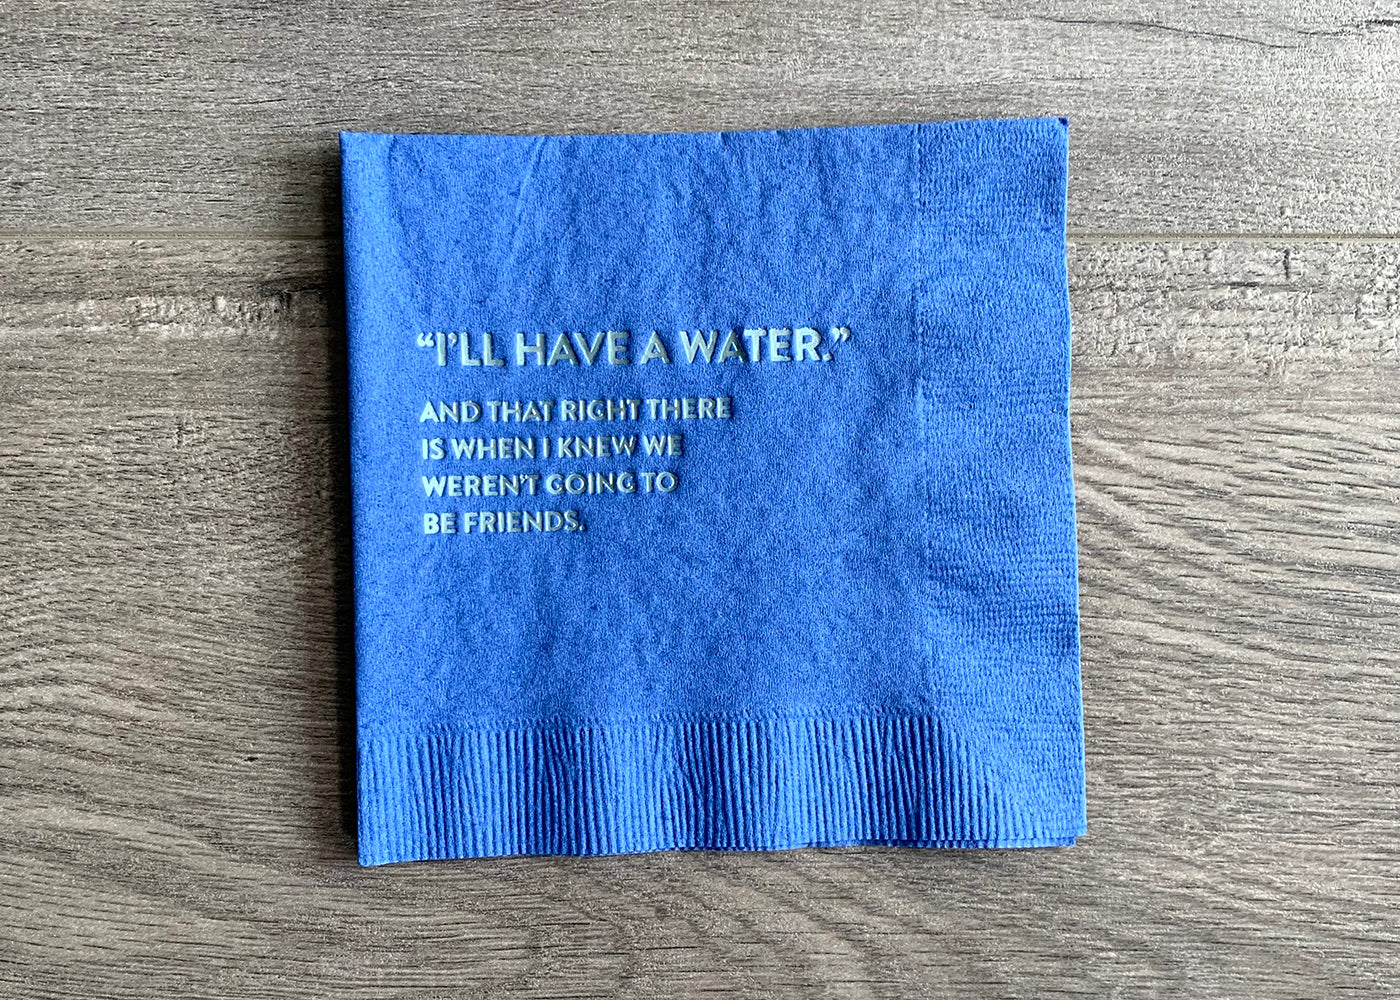 A royal blue cocktail napkin lies on a wooden background. In metallic light blue foil, it reads a quote "I'll have a water." with the wording "and that right there is when I knew we weren't going to be friends."